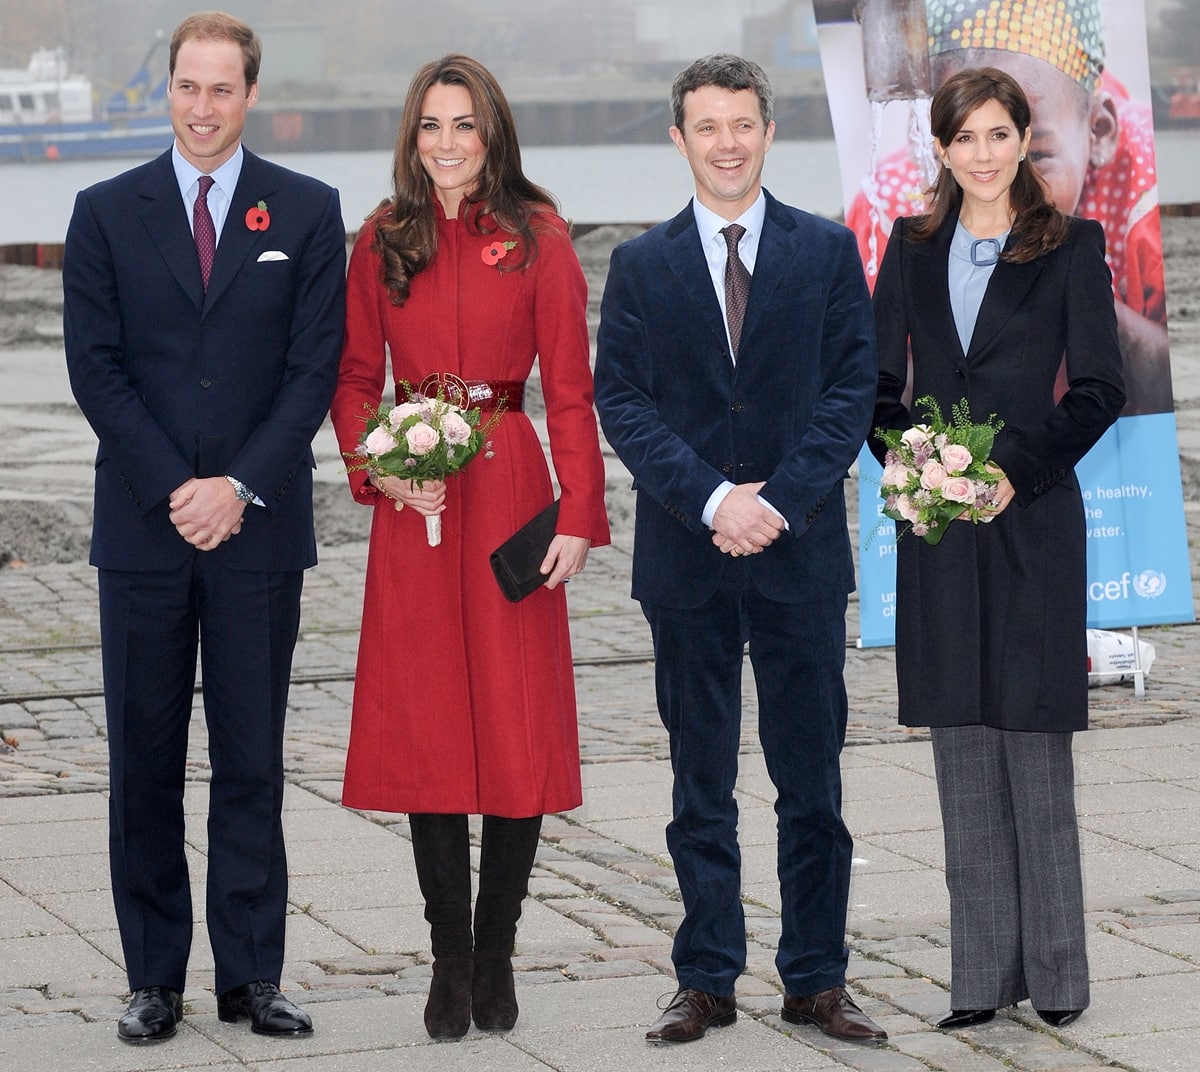 Prince William and Catherine, Duchess of Cambridge, along with Prince Frederik and Princess Mary of Denmark, visit the Unicef Supply Division Centre in Copenhagen, Denmark, on November 2, 2011